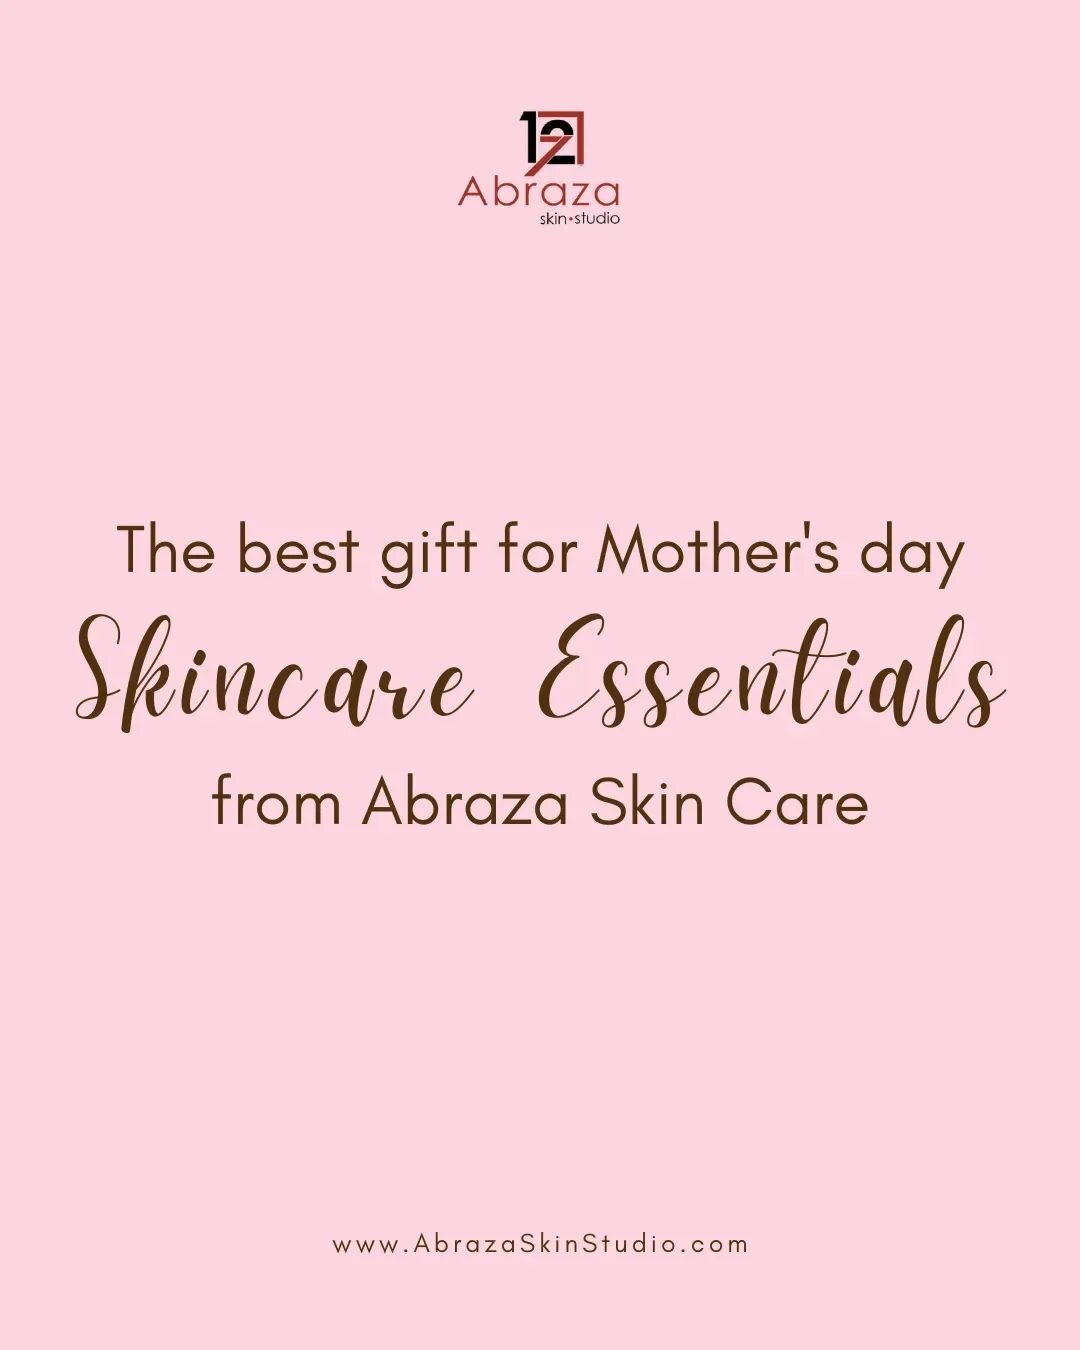 Give your mom the gift of self-care this Mother's Day with @abrazaskincare products! Shop now and enjoy 20% off sitewide.

Treat her to the ultimate pampering experience she truly deserves. ❤️

Flash sale ends today, 12pm EST. Visit AbrazaSkinCare.co